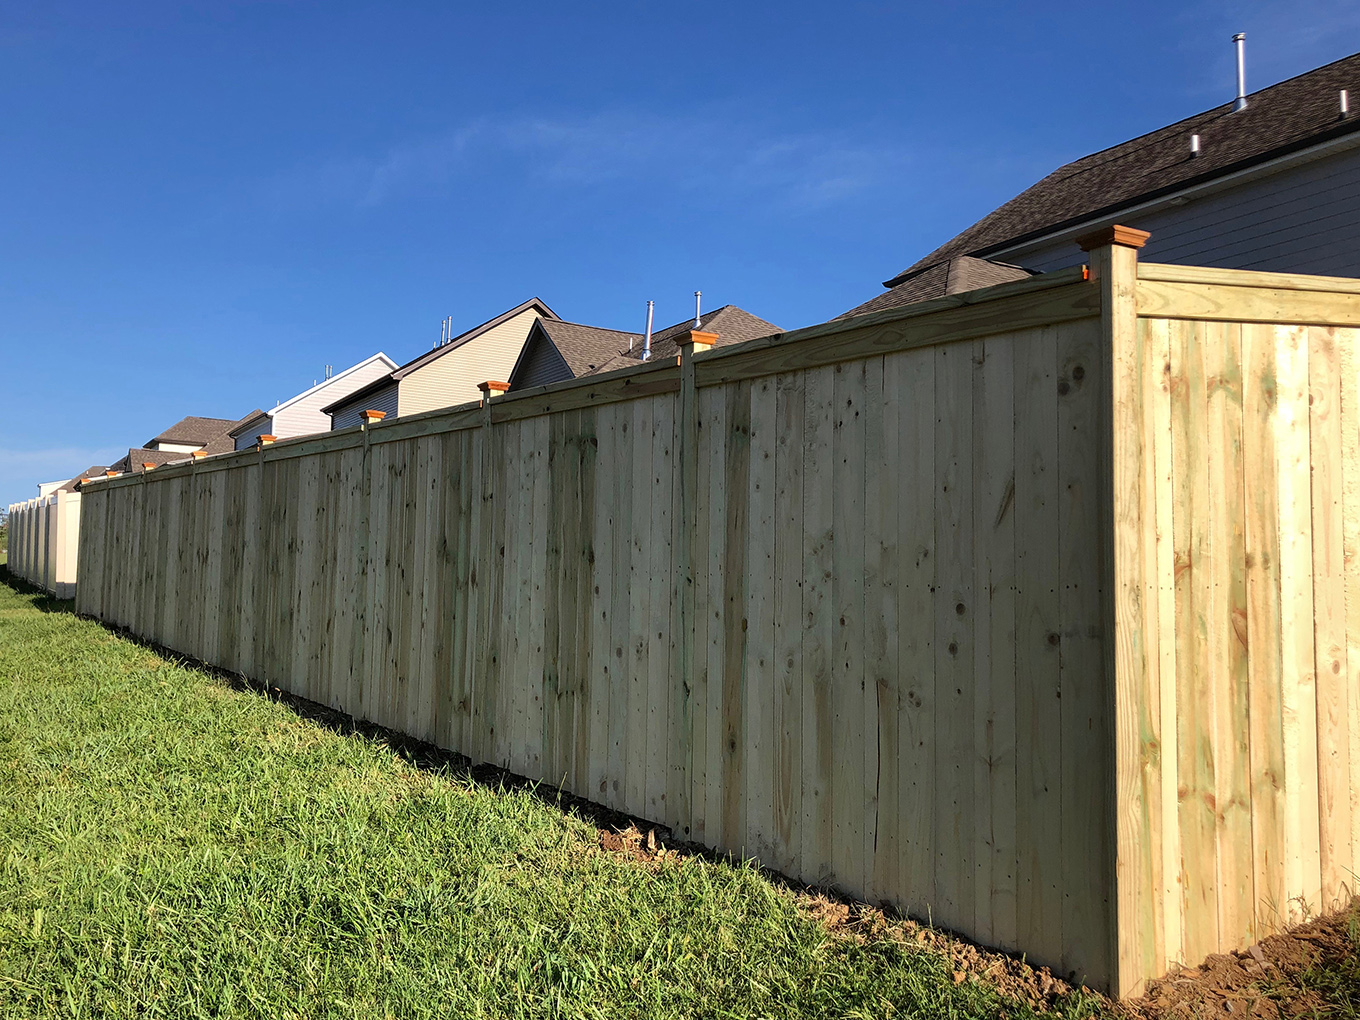 Nolensville Tennessee residential fencing company